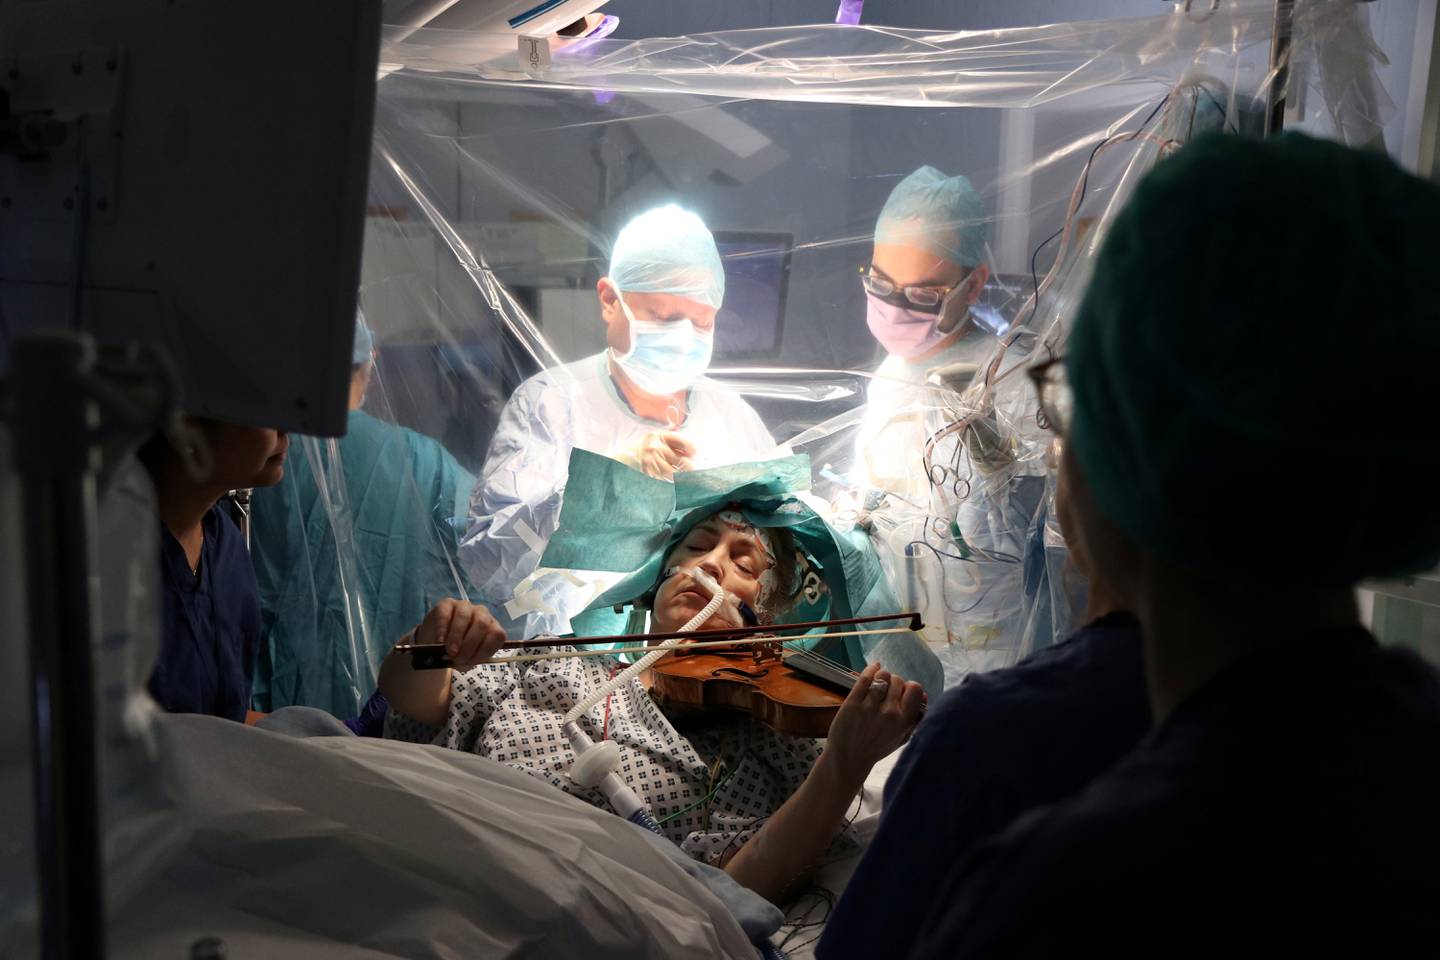 A patient Dagmar Turner, 53, plays violin while surgeons remove her brain tumour at King's College Hospital in London, Britain, January 31, 2020 in this handout image obtained by Reuters on February 19, 2020. King's College Hospital/Handout via REUTERS THIS IMAGE HAS BEEN SUPPLIED BY A THIRD PARTY. NO RESALES. NO ARCHIVES MANDATORY CREDIT     TPX IMAGES OF THE DAY